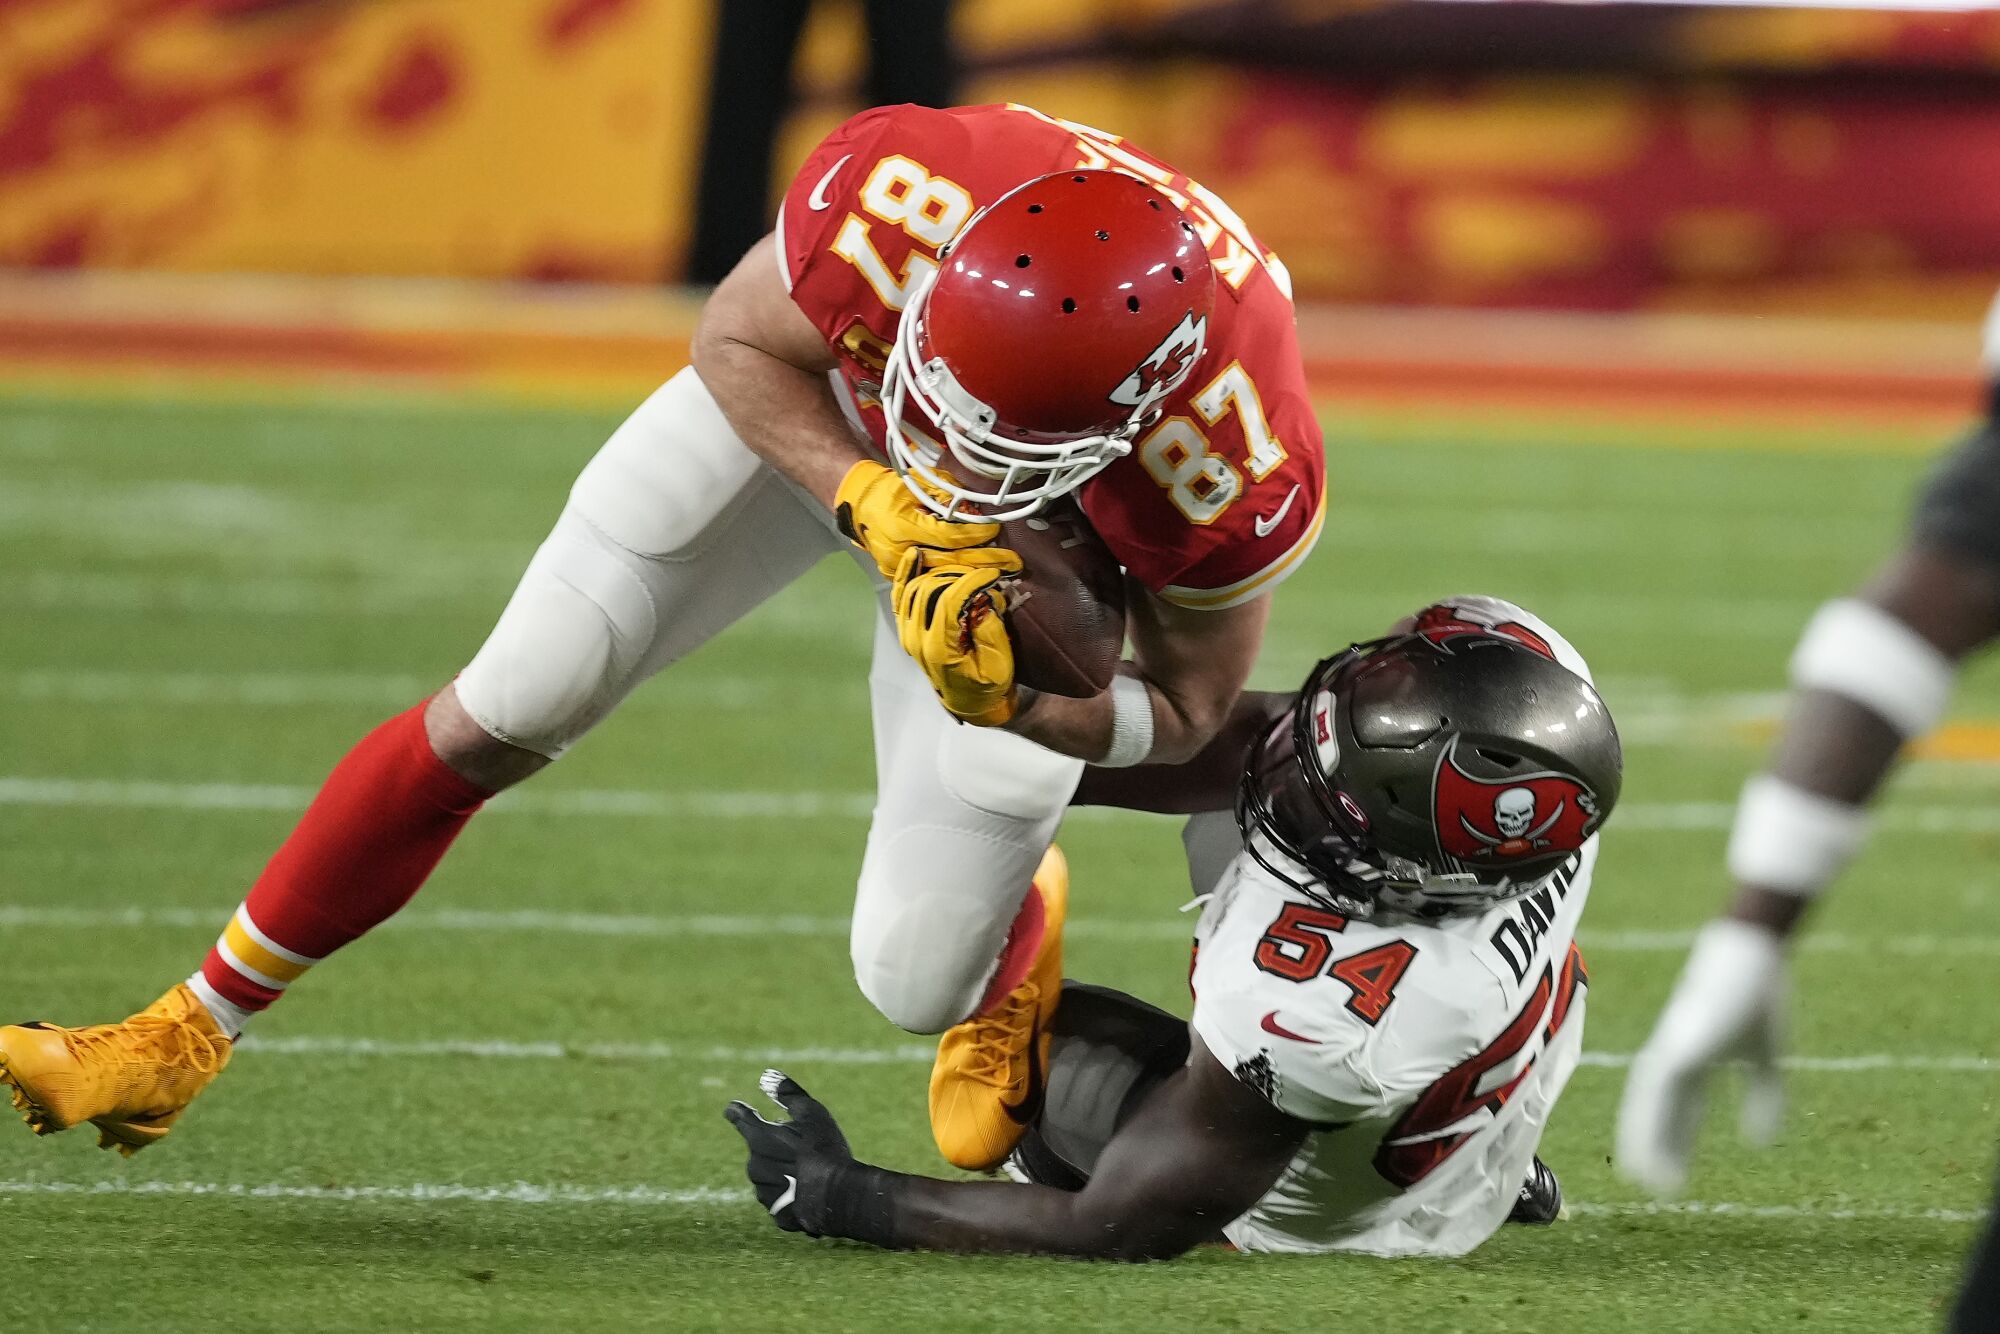 Kansas City Chiefs tight end Travis Kelce is tackled by Tampa Bay Buccaneers linebacker Lavonte David.